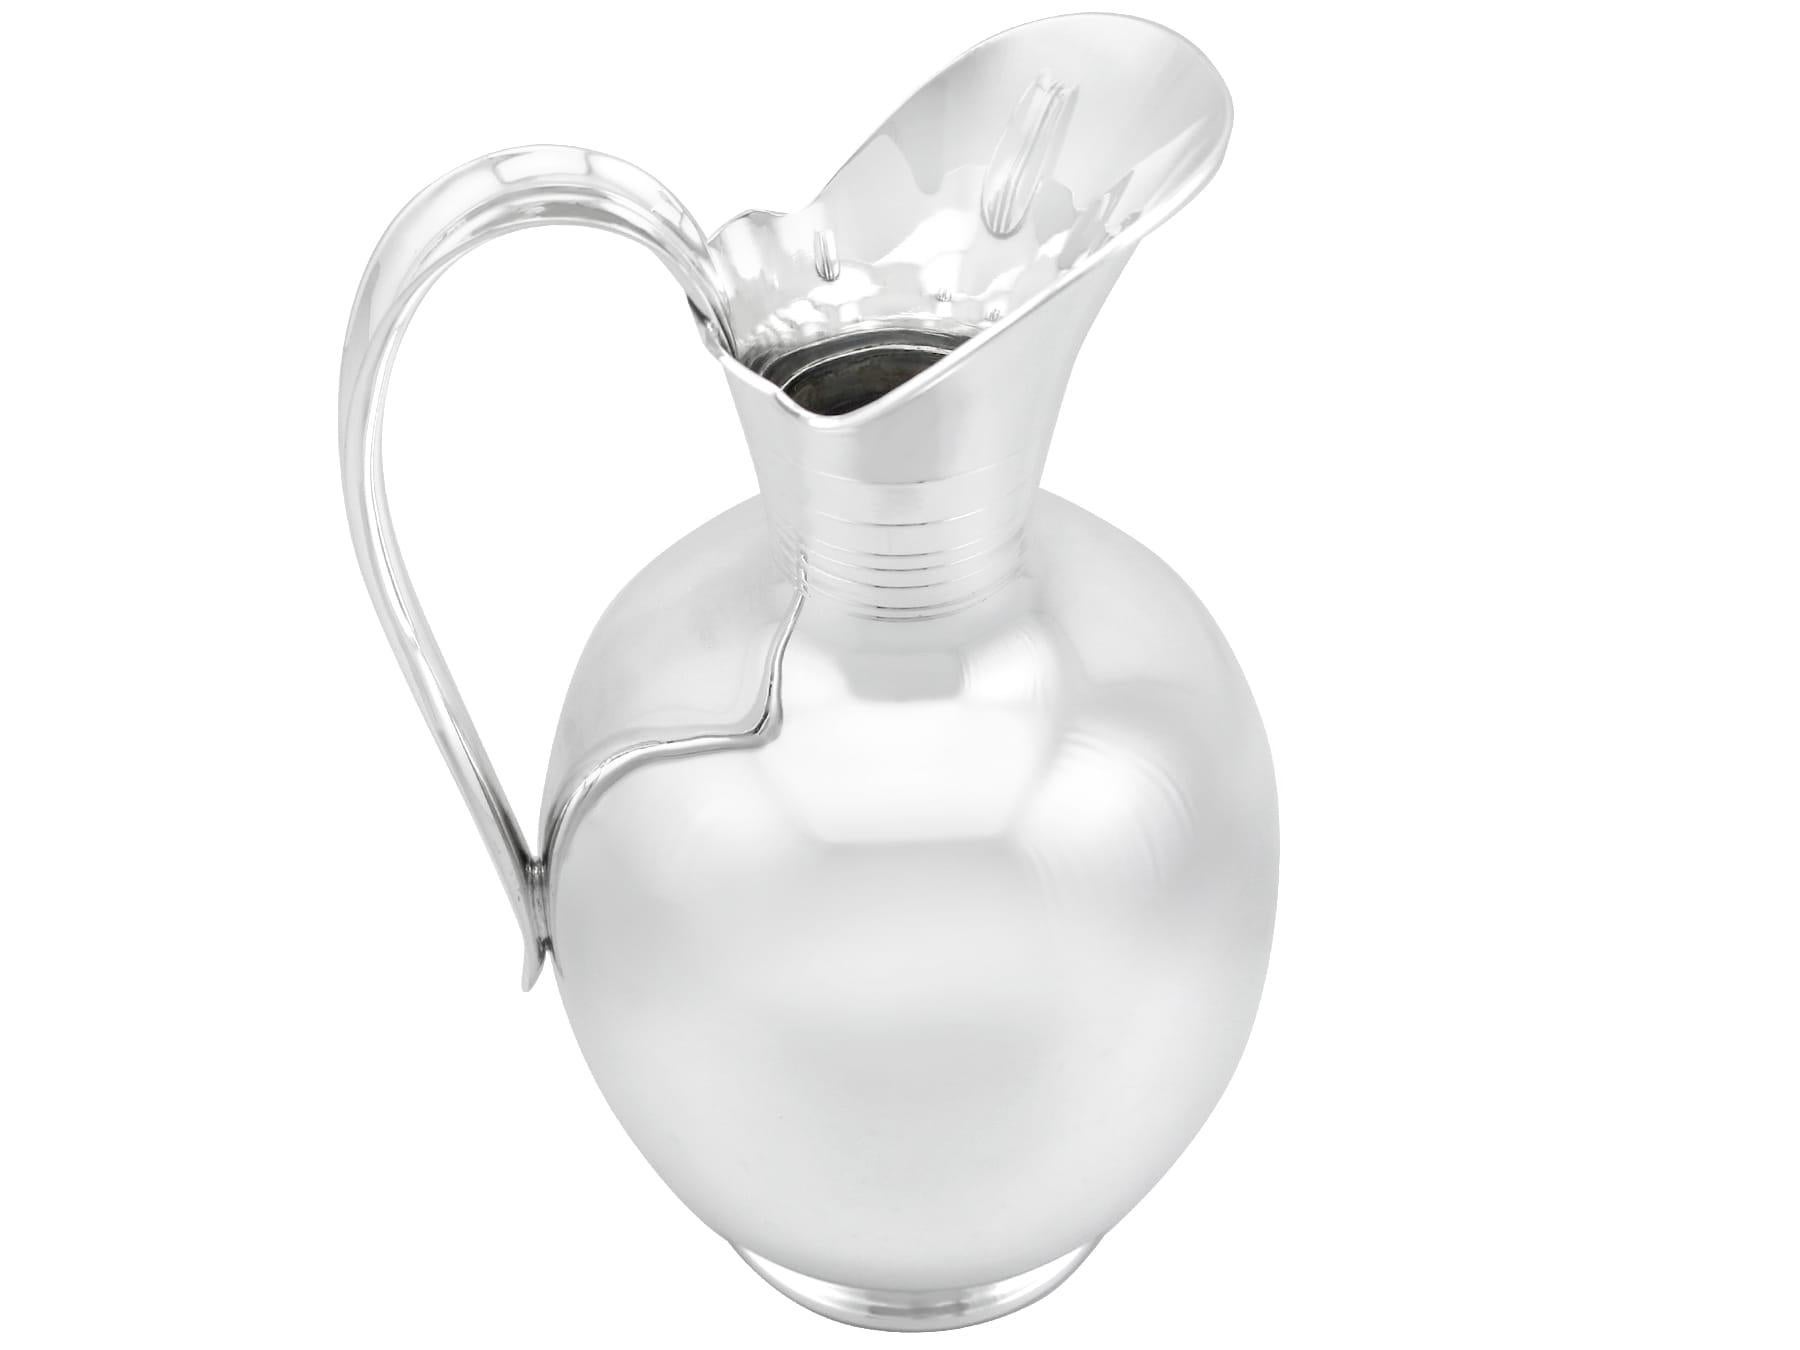 An exceptional, fine and impressive antique German silver cordial/water jug; part of our dining silverware collection

This exceptional antique German silver water jug has a circular rounded form onto a circular spreading foot.

The ovoid-shaped